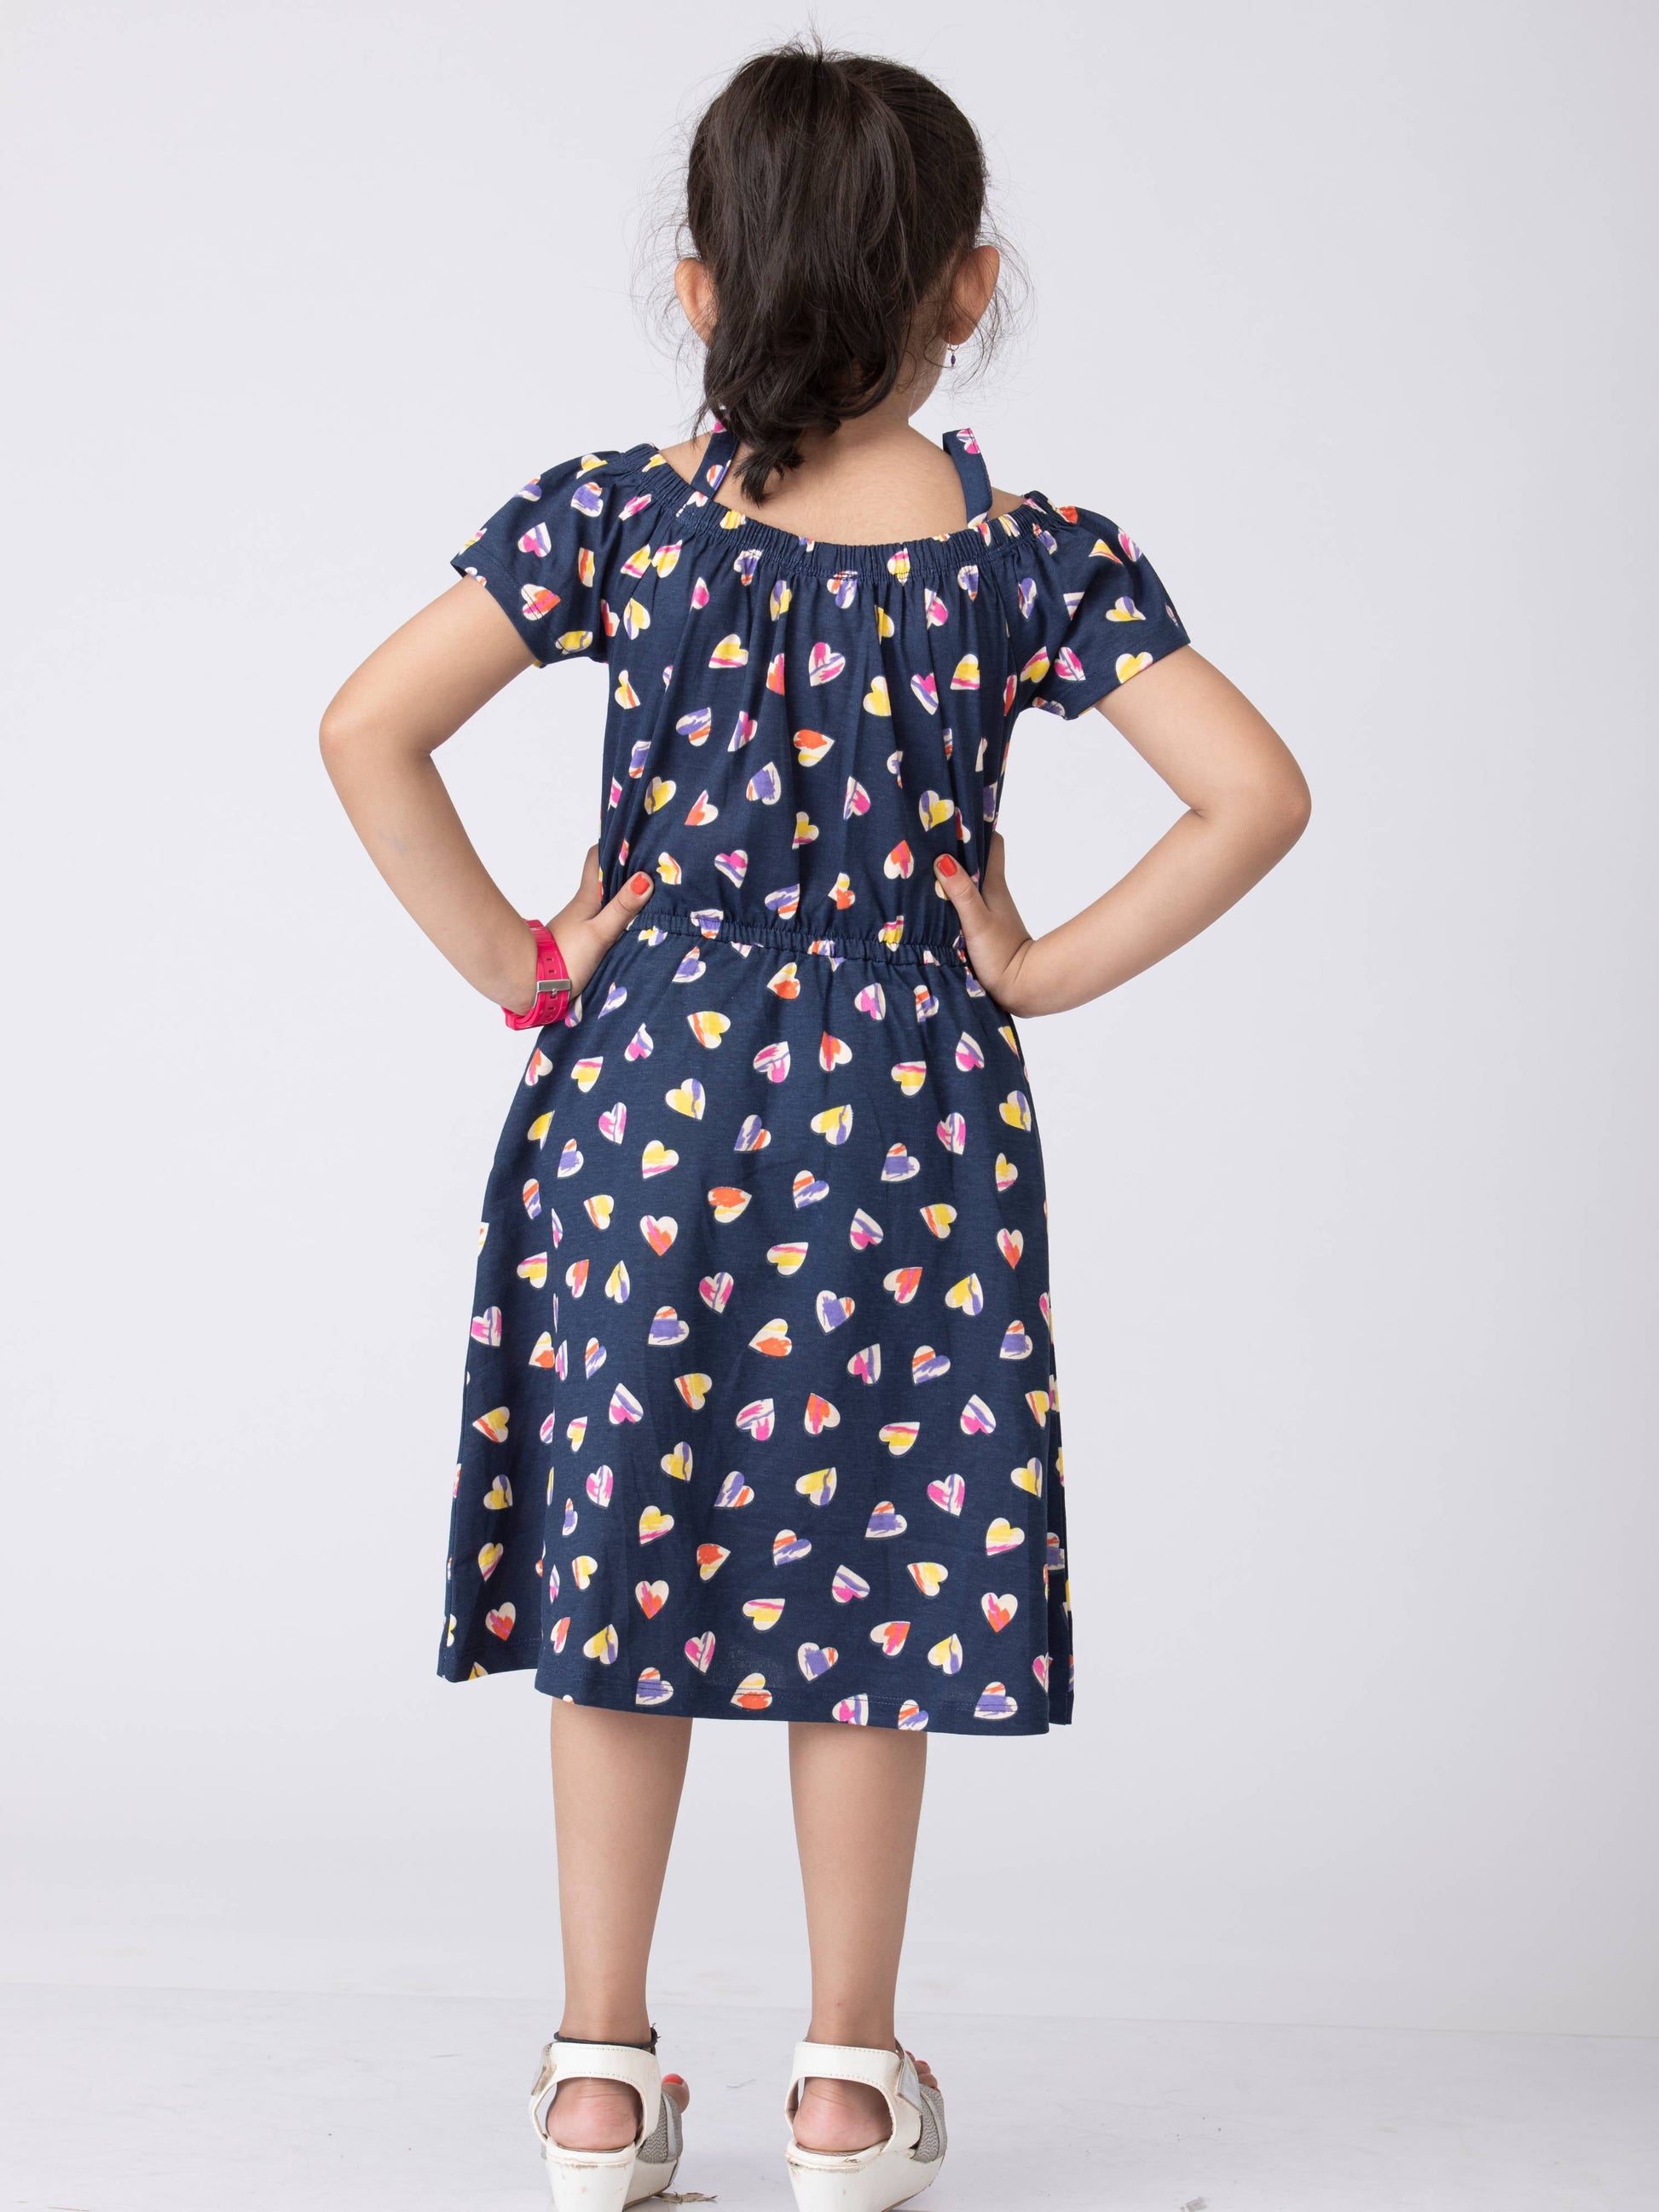 Hearty Adorable Printed Girls Frock